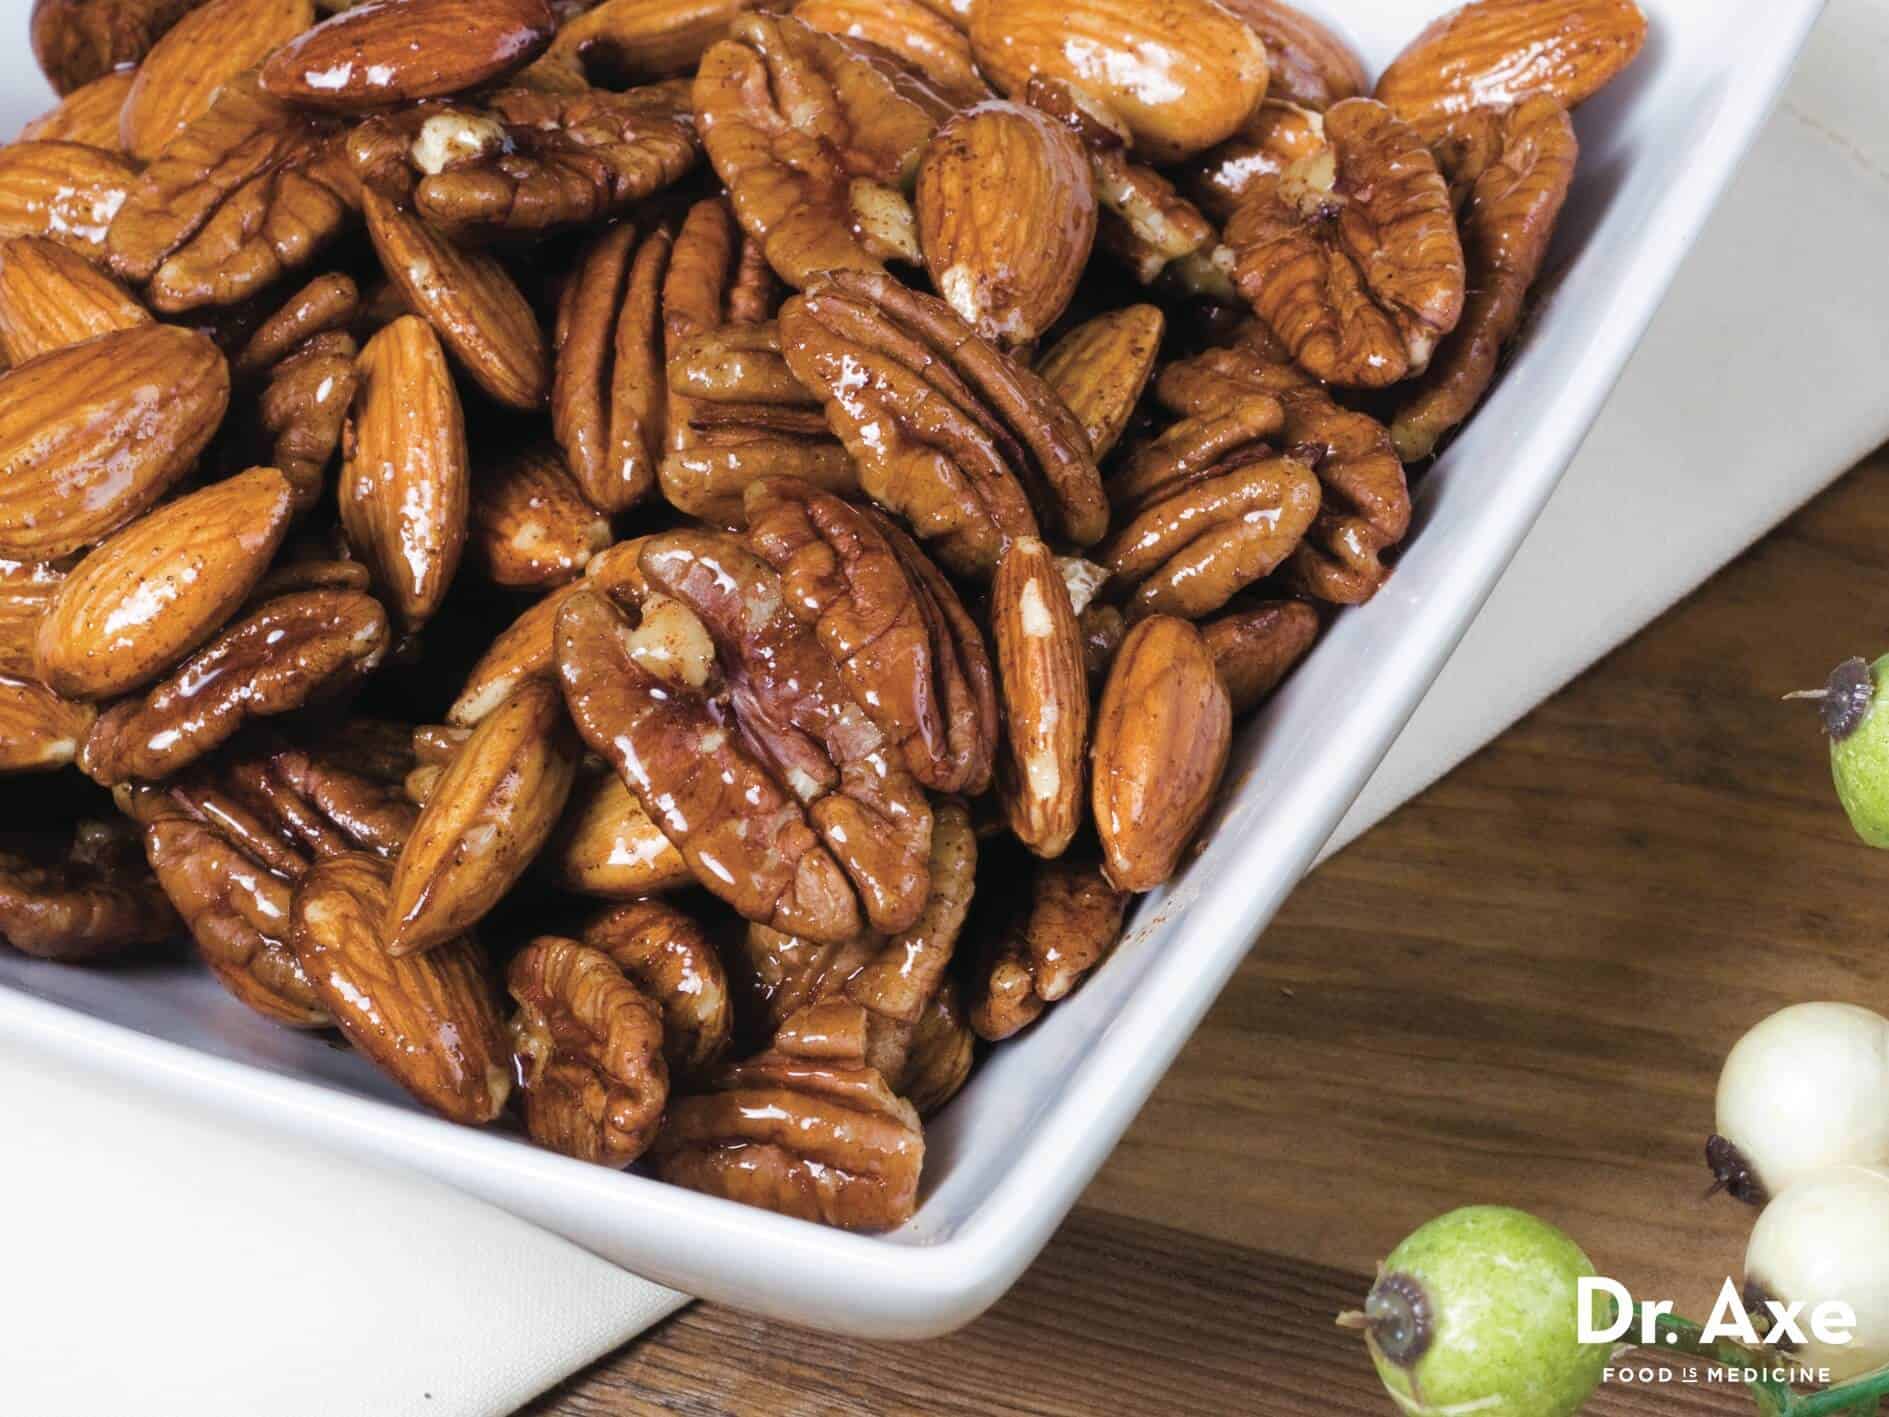 Spiced nuts recipe - Dr. Axe